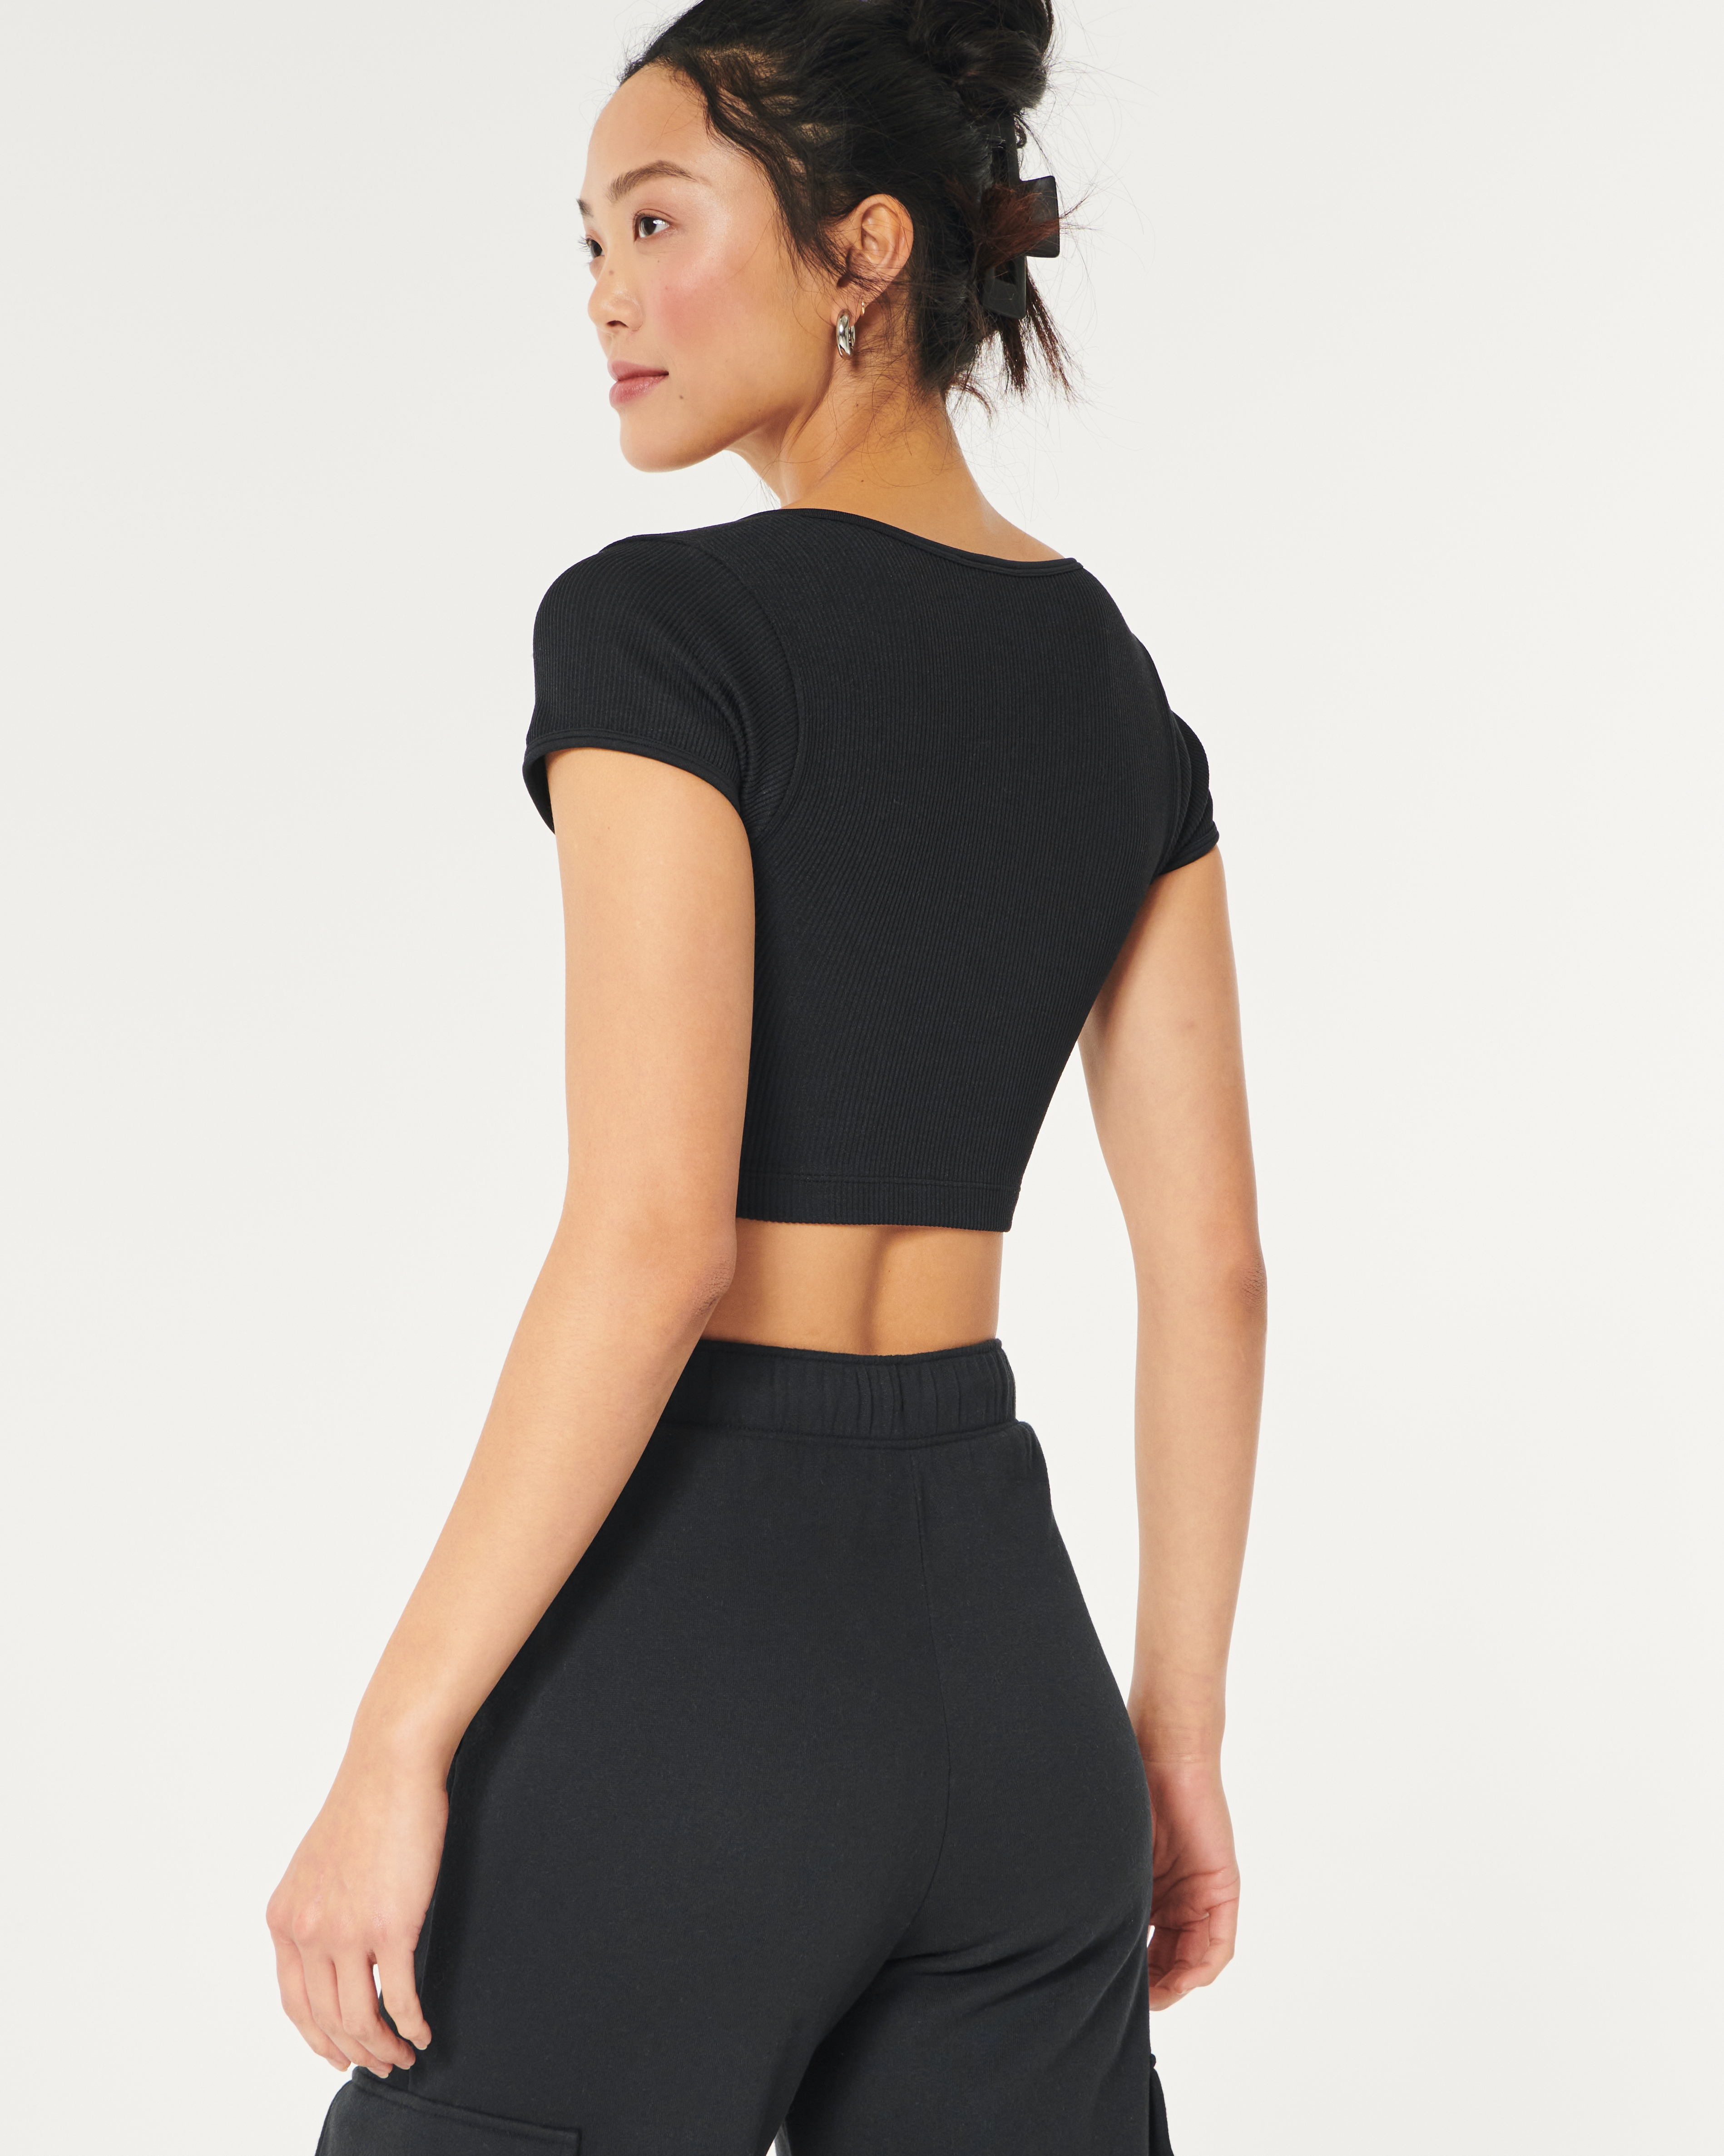 Gilly Hicks Ribbed Seamless Cinched Top